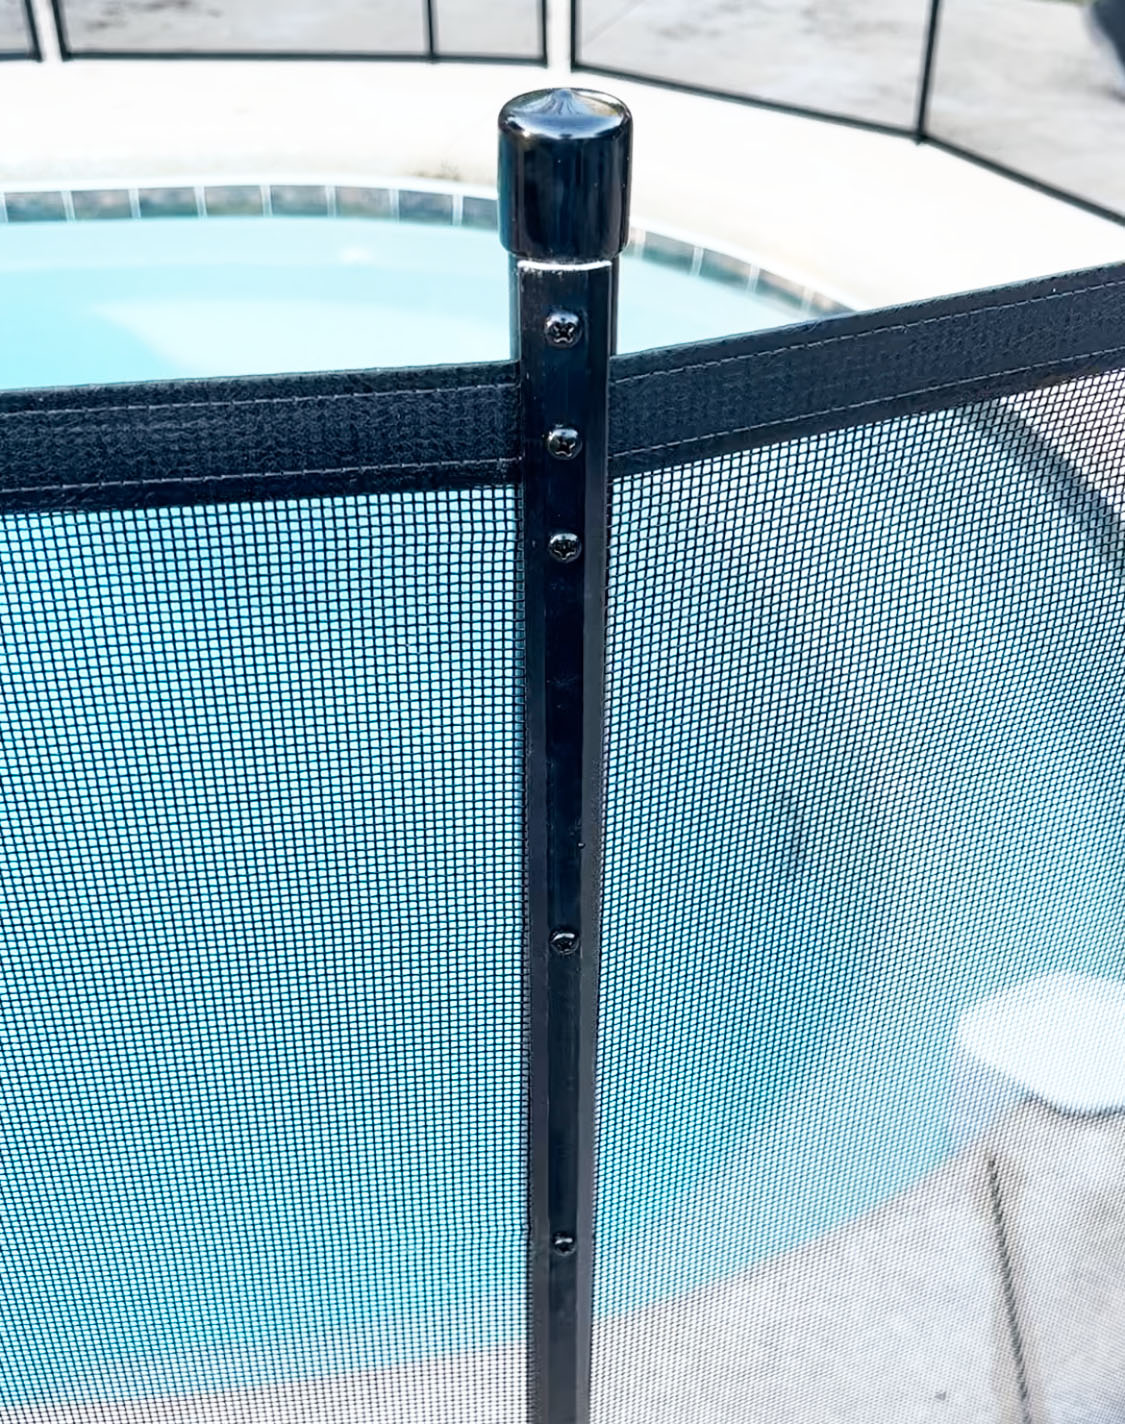 Old style pool fence post with screws and molding strips connecting mesh to post.